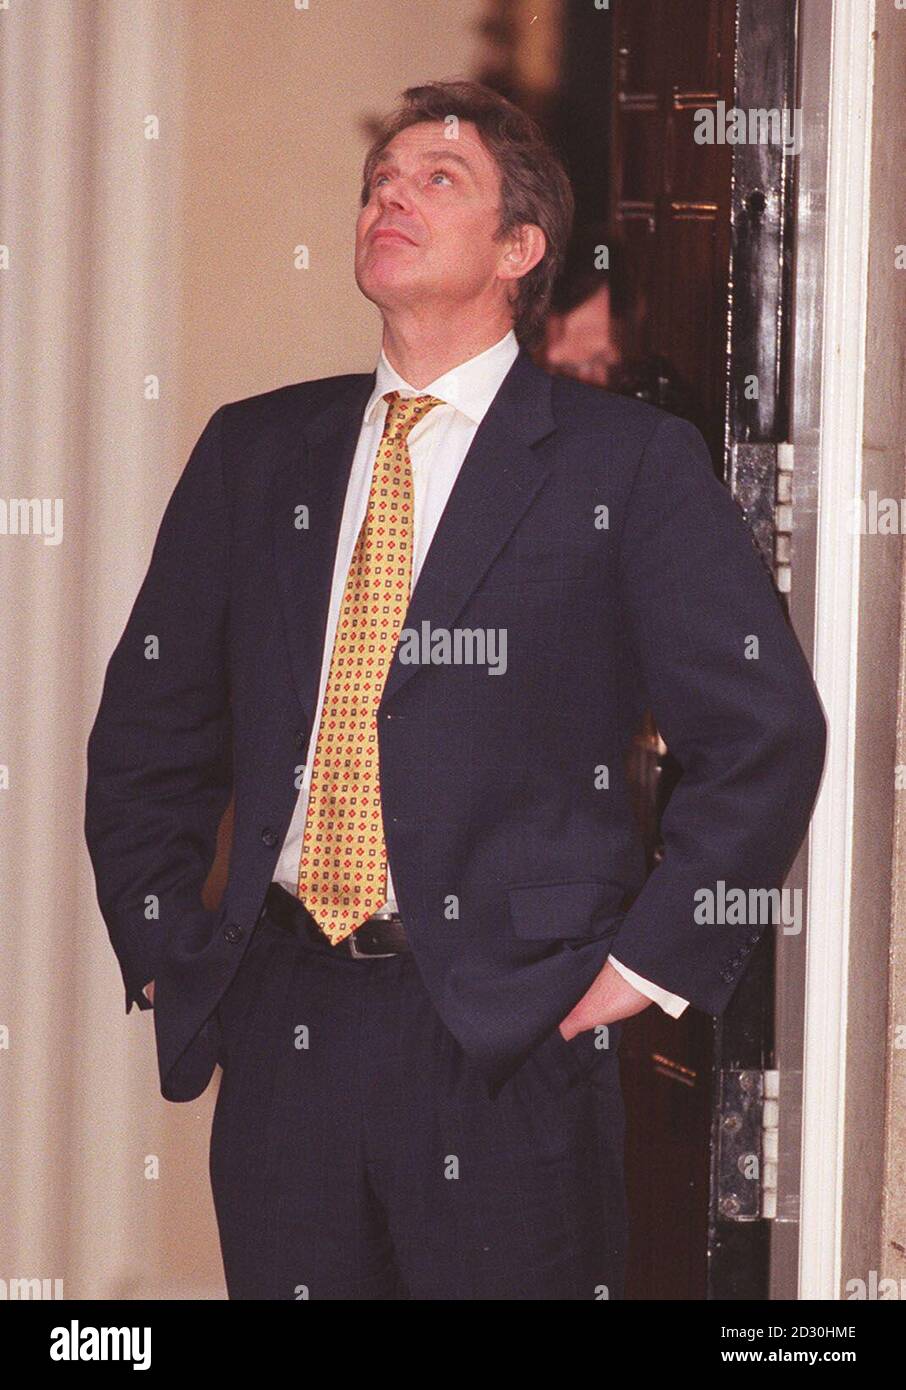 Prime Minister Tony Blair stands at the door of No10 Downing Street following the departure of representatives of the islands attending the inaugural meeting of the British-Irish Council. Stock Photo